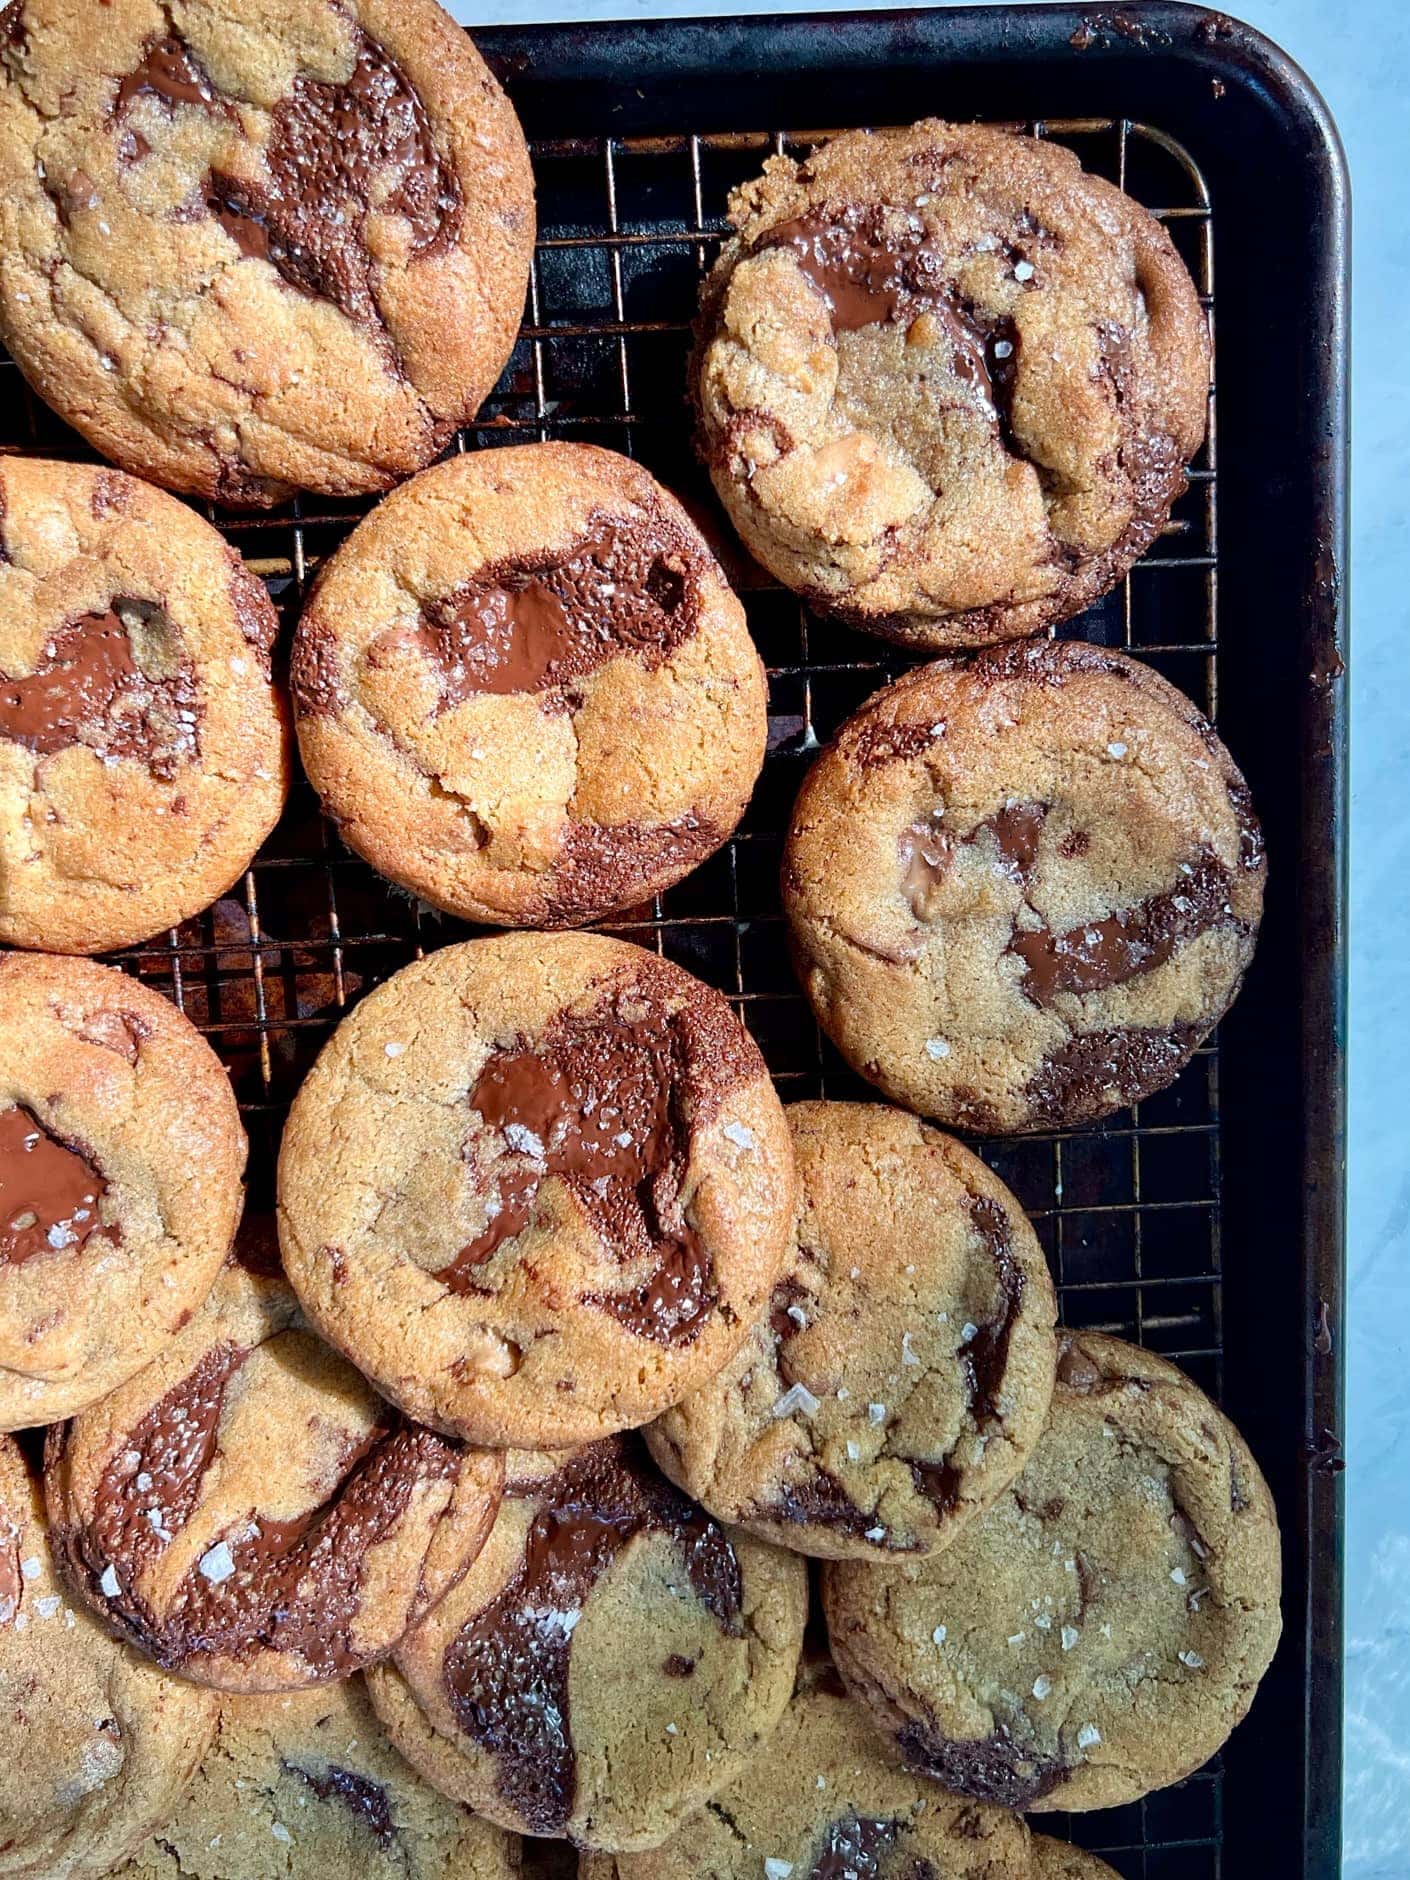 https://www.lionsbread.com/wp-content/uploads/2023/01/Brown-Butter-Chocolate-Chunk-Cookies-with-Toffee.jpg